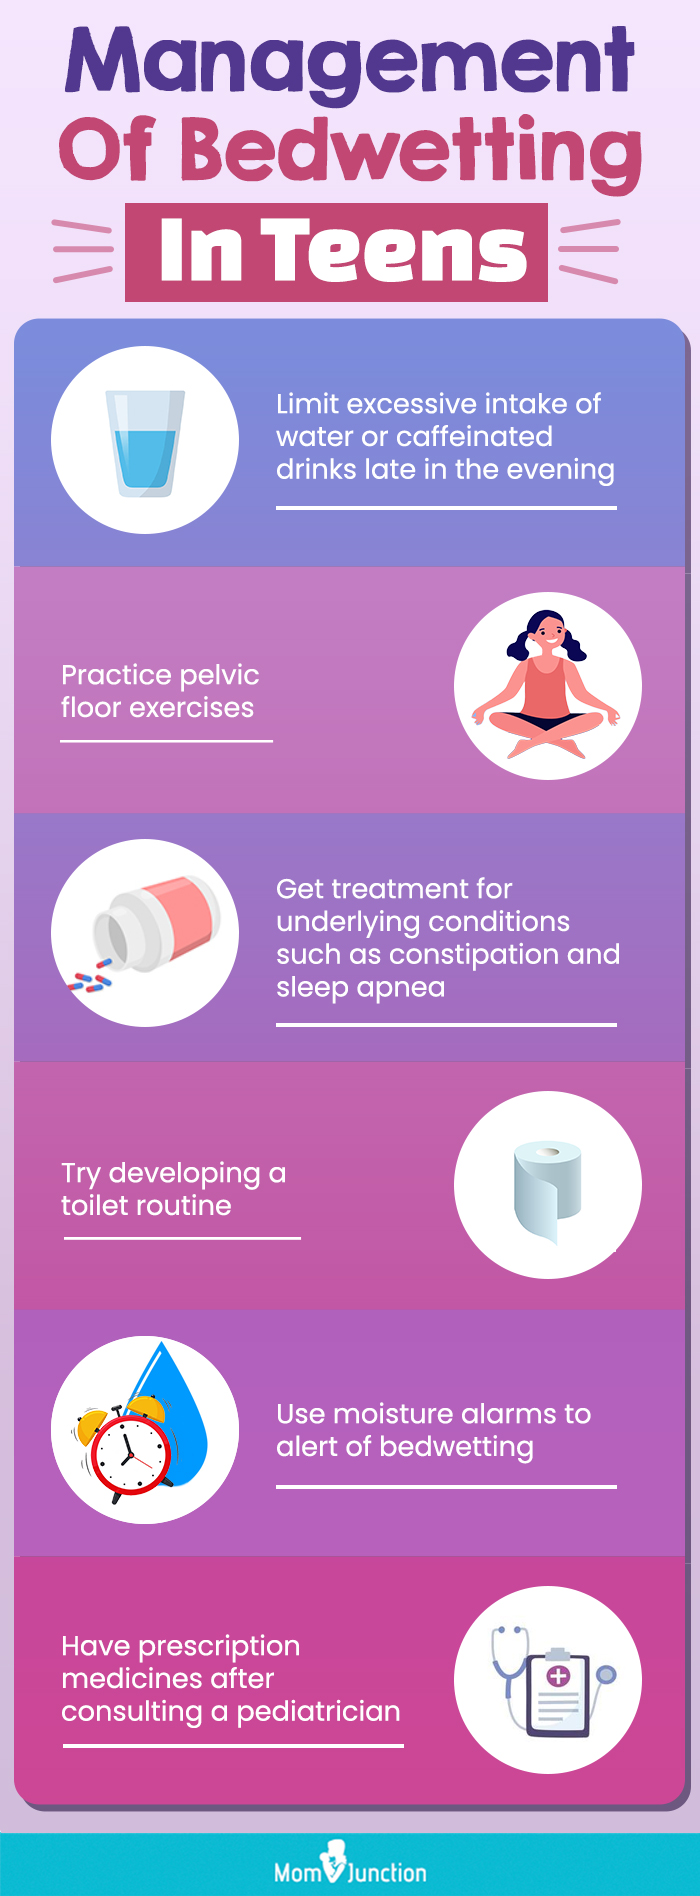 management of bedwetting in teens (infographic)